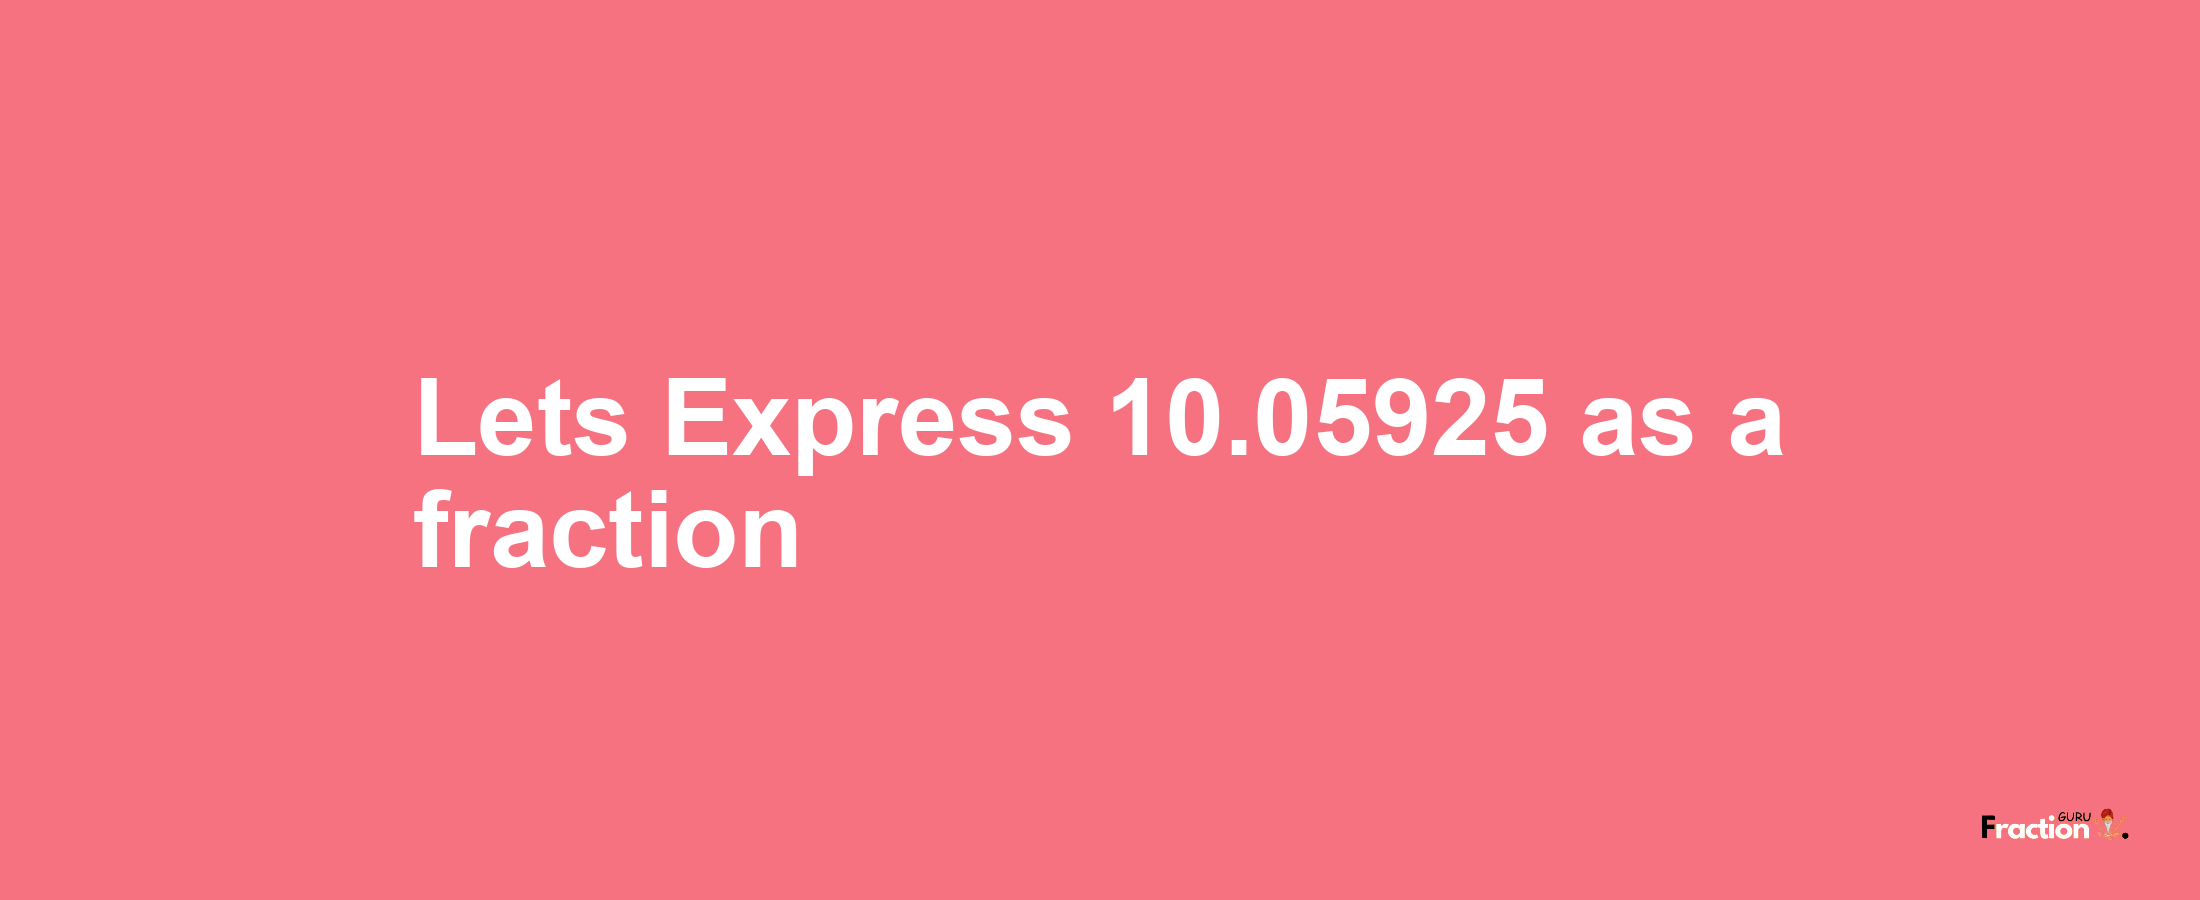 Lets Express 10.05925 as afraction